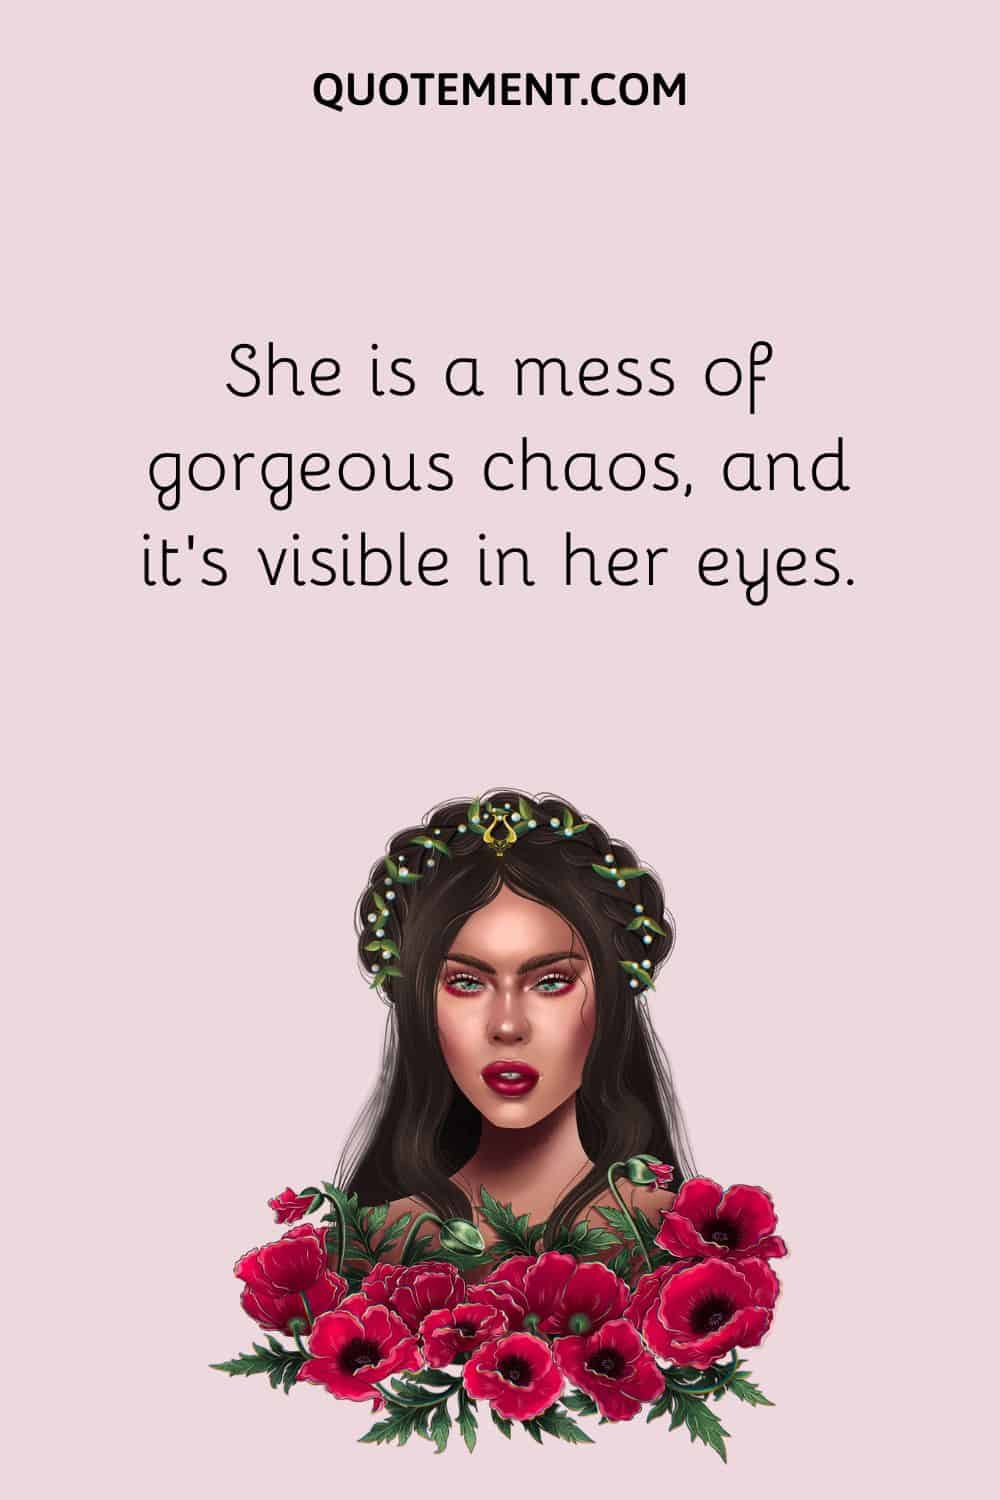 She is a mess of gorgeous chaos